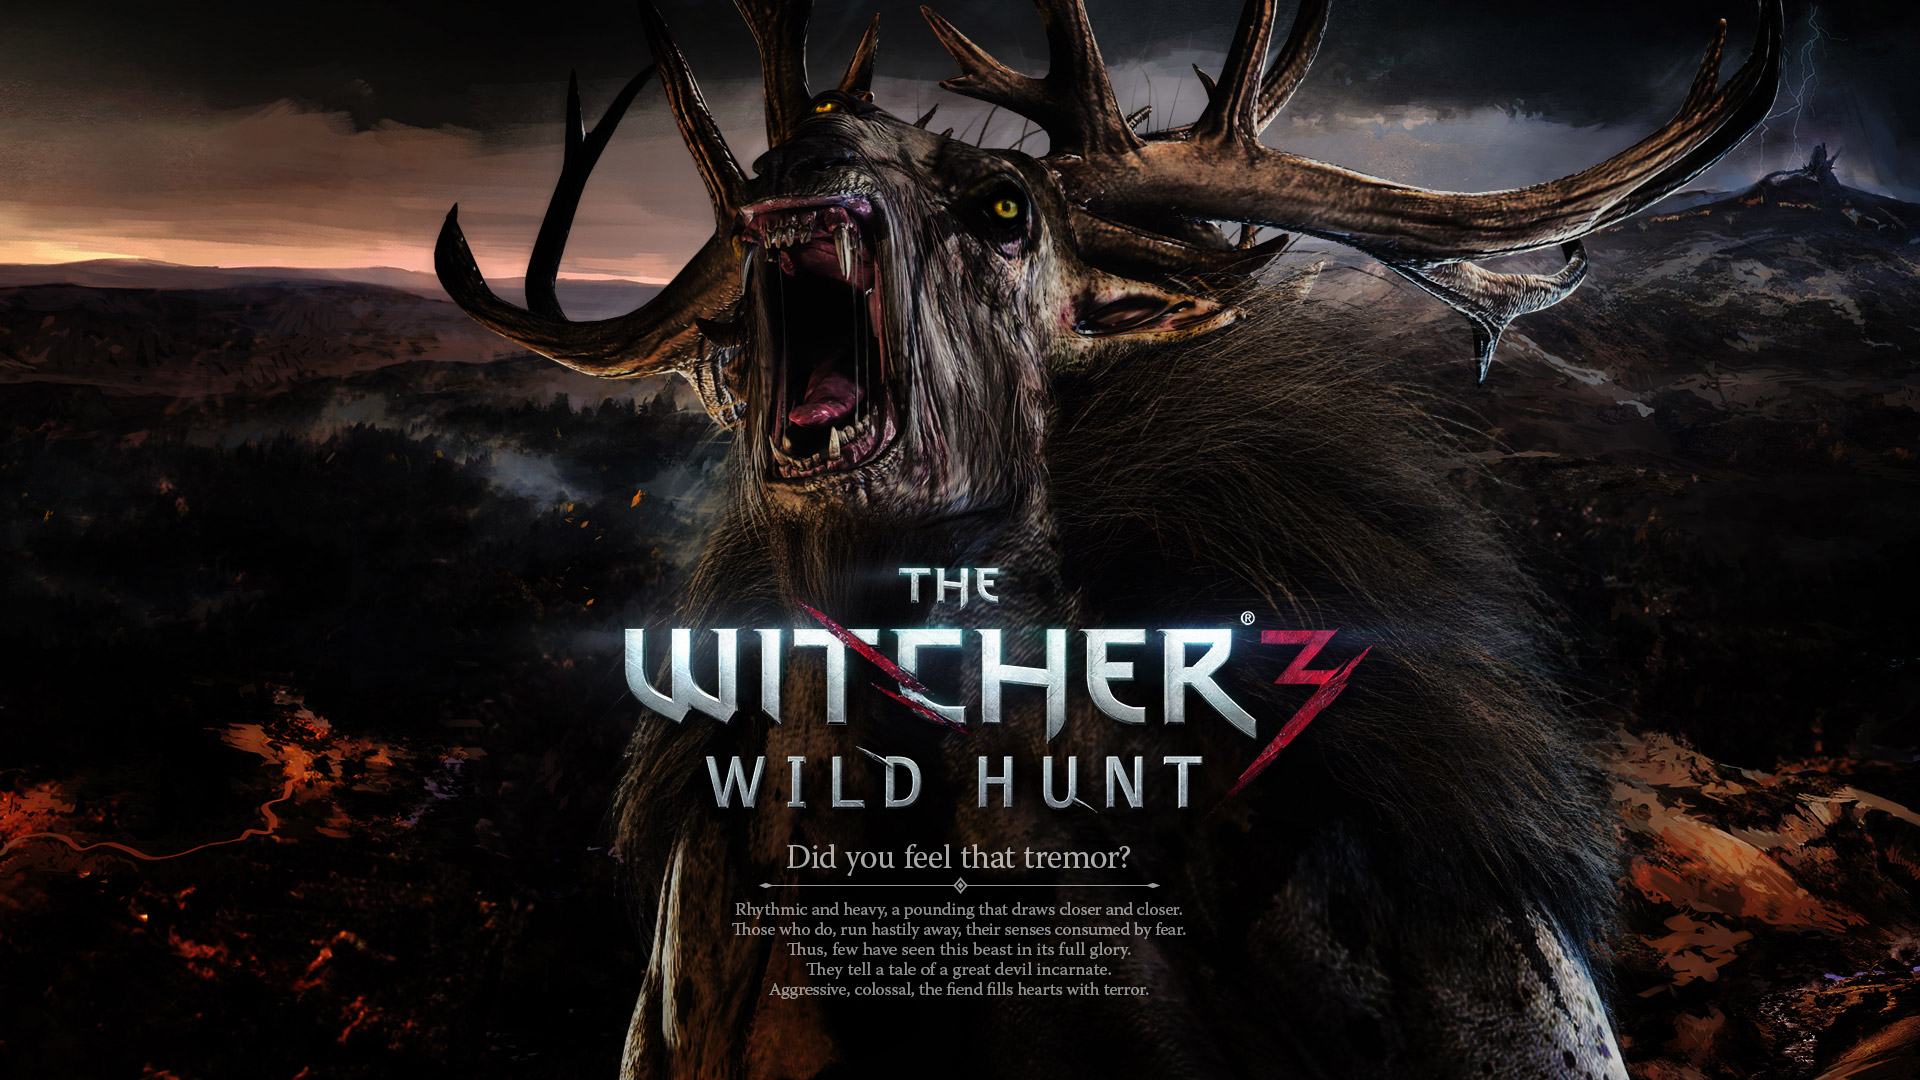 The Witcher 3 wallpaper 16